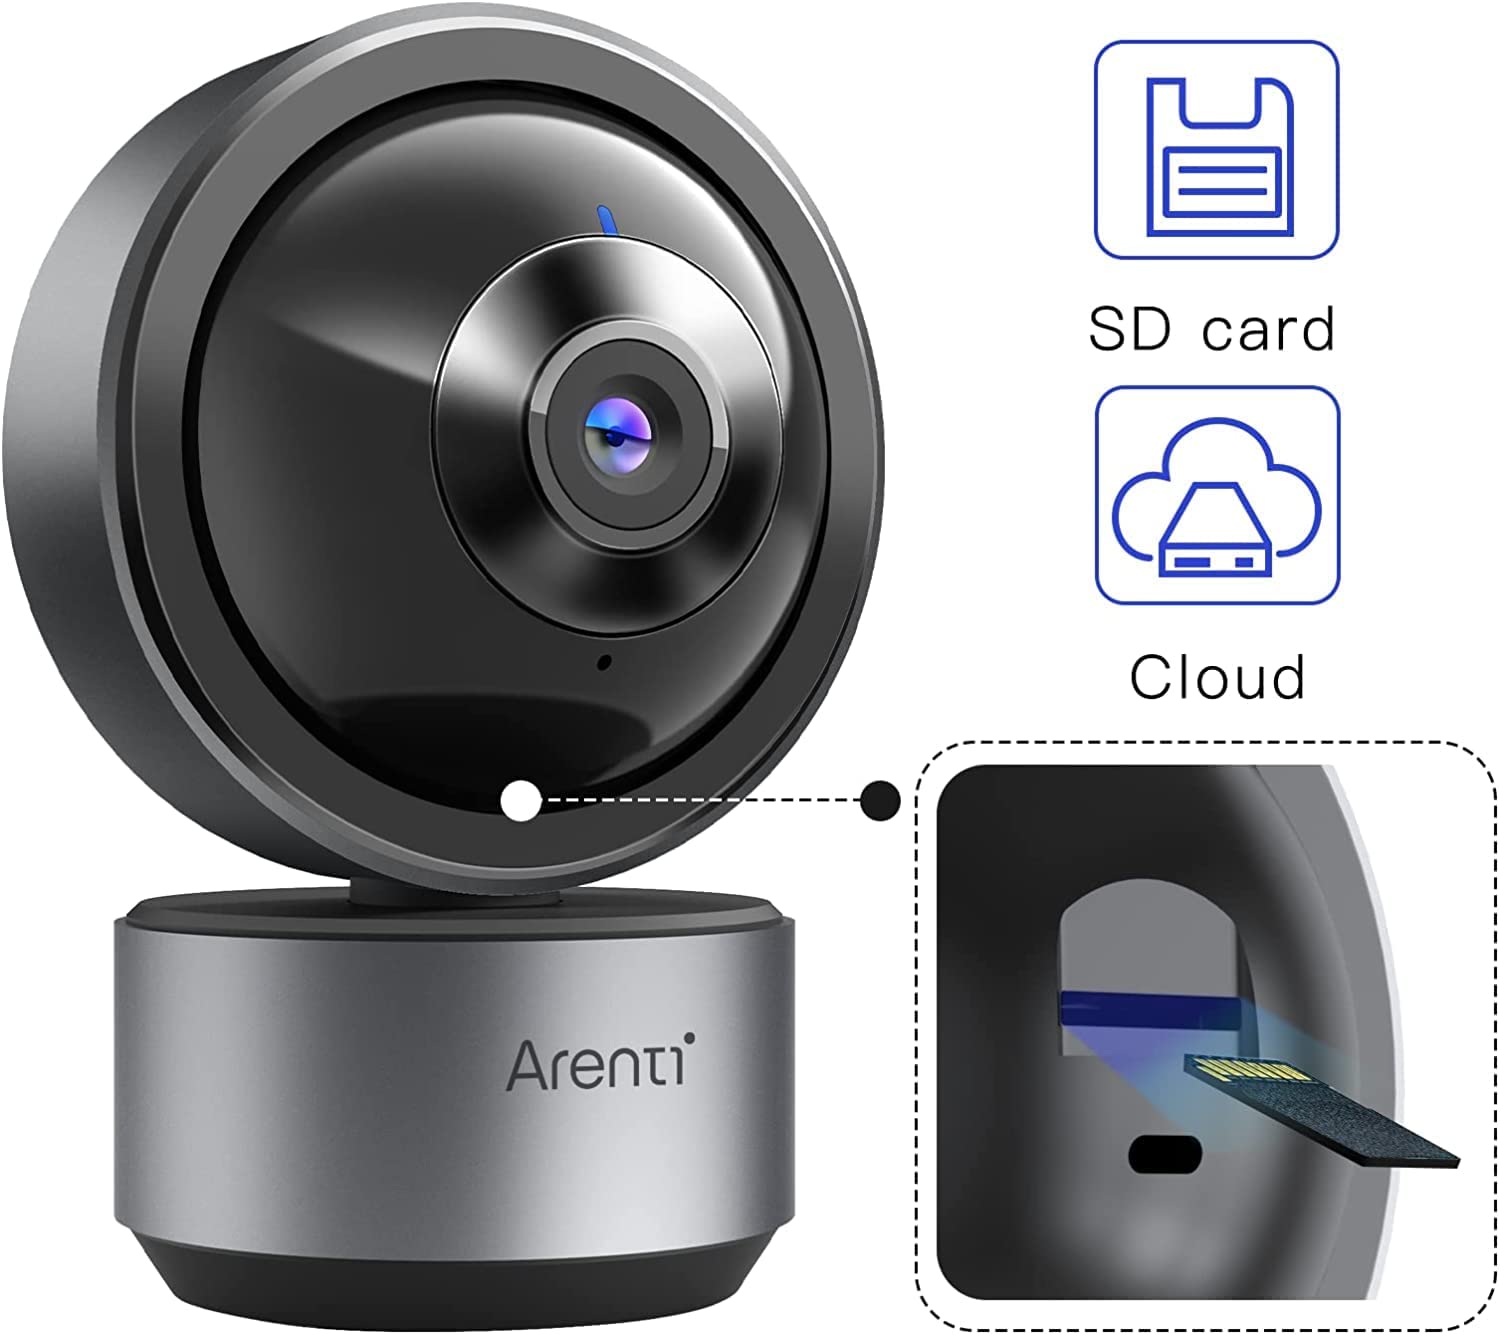 Arenti Indoor Home Security Camera, DOME1 2K Ultra HD WiFi Baby Monitor, Night Vision, 2-Way Audio, Privacy Mode, Works with Alexa & Google Assistant, AI Powered Human Motion & Sound Detection